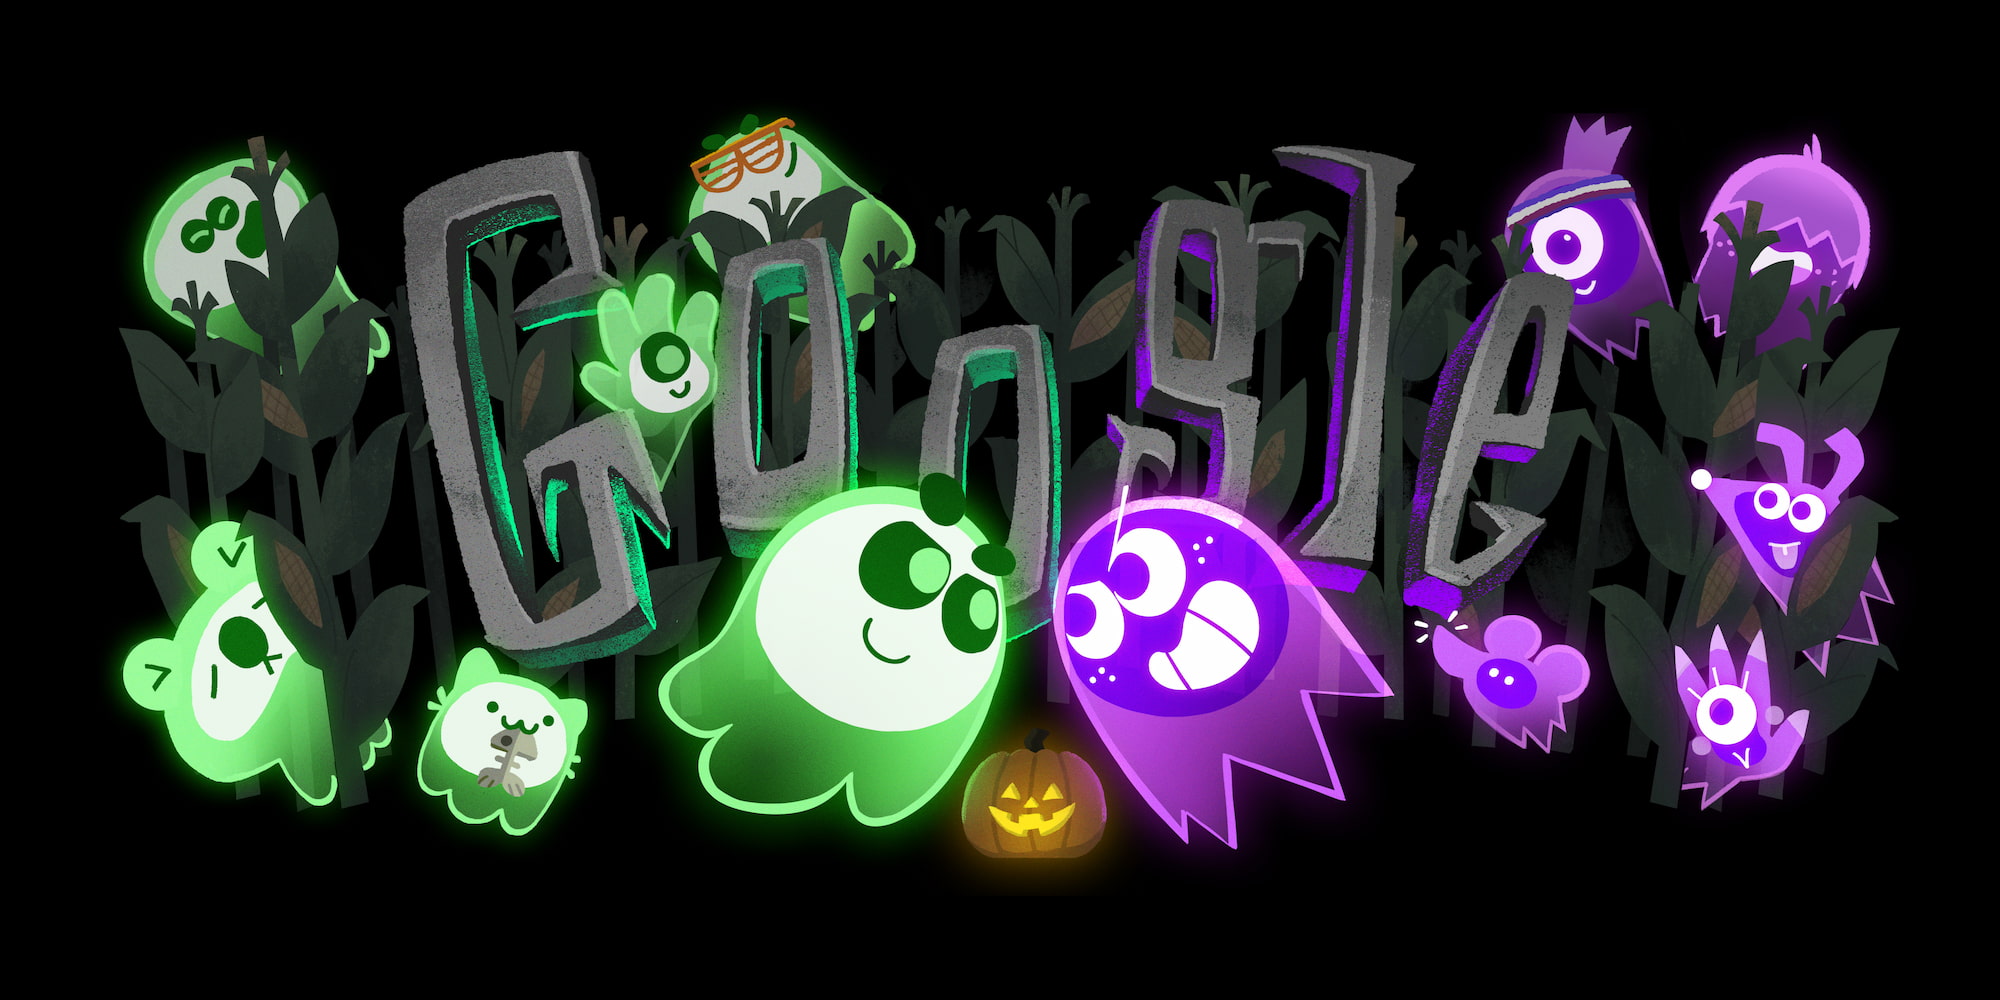 Momo the Cat is back for the 2020 Halloween Google Doodle